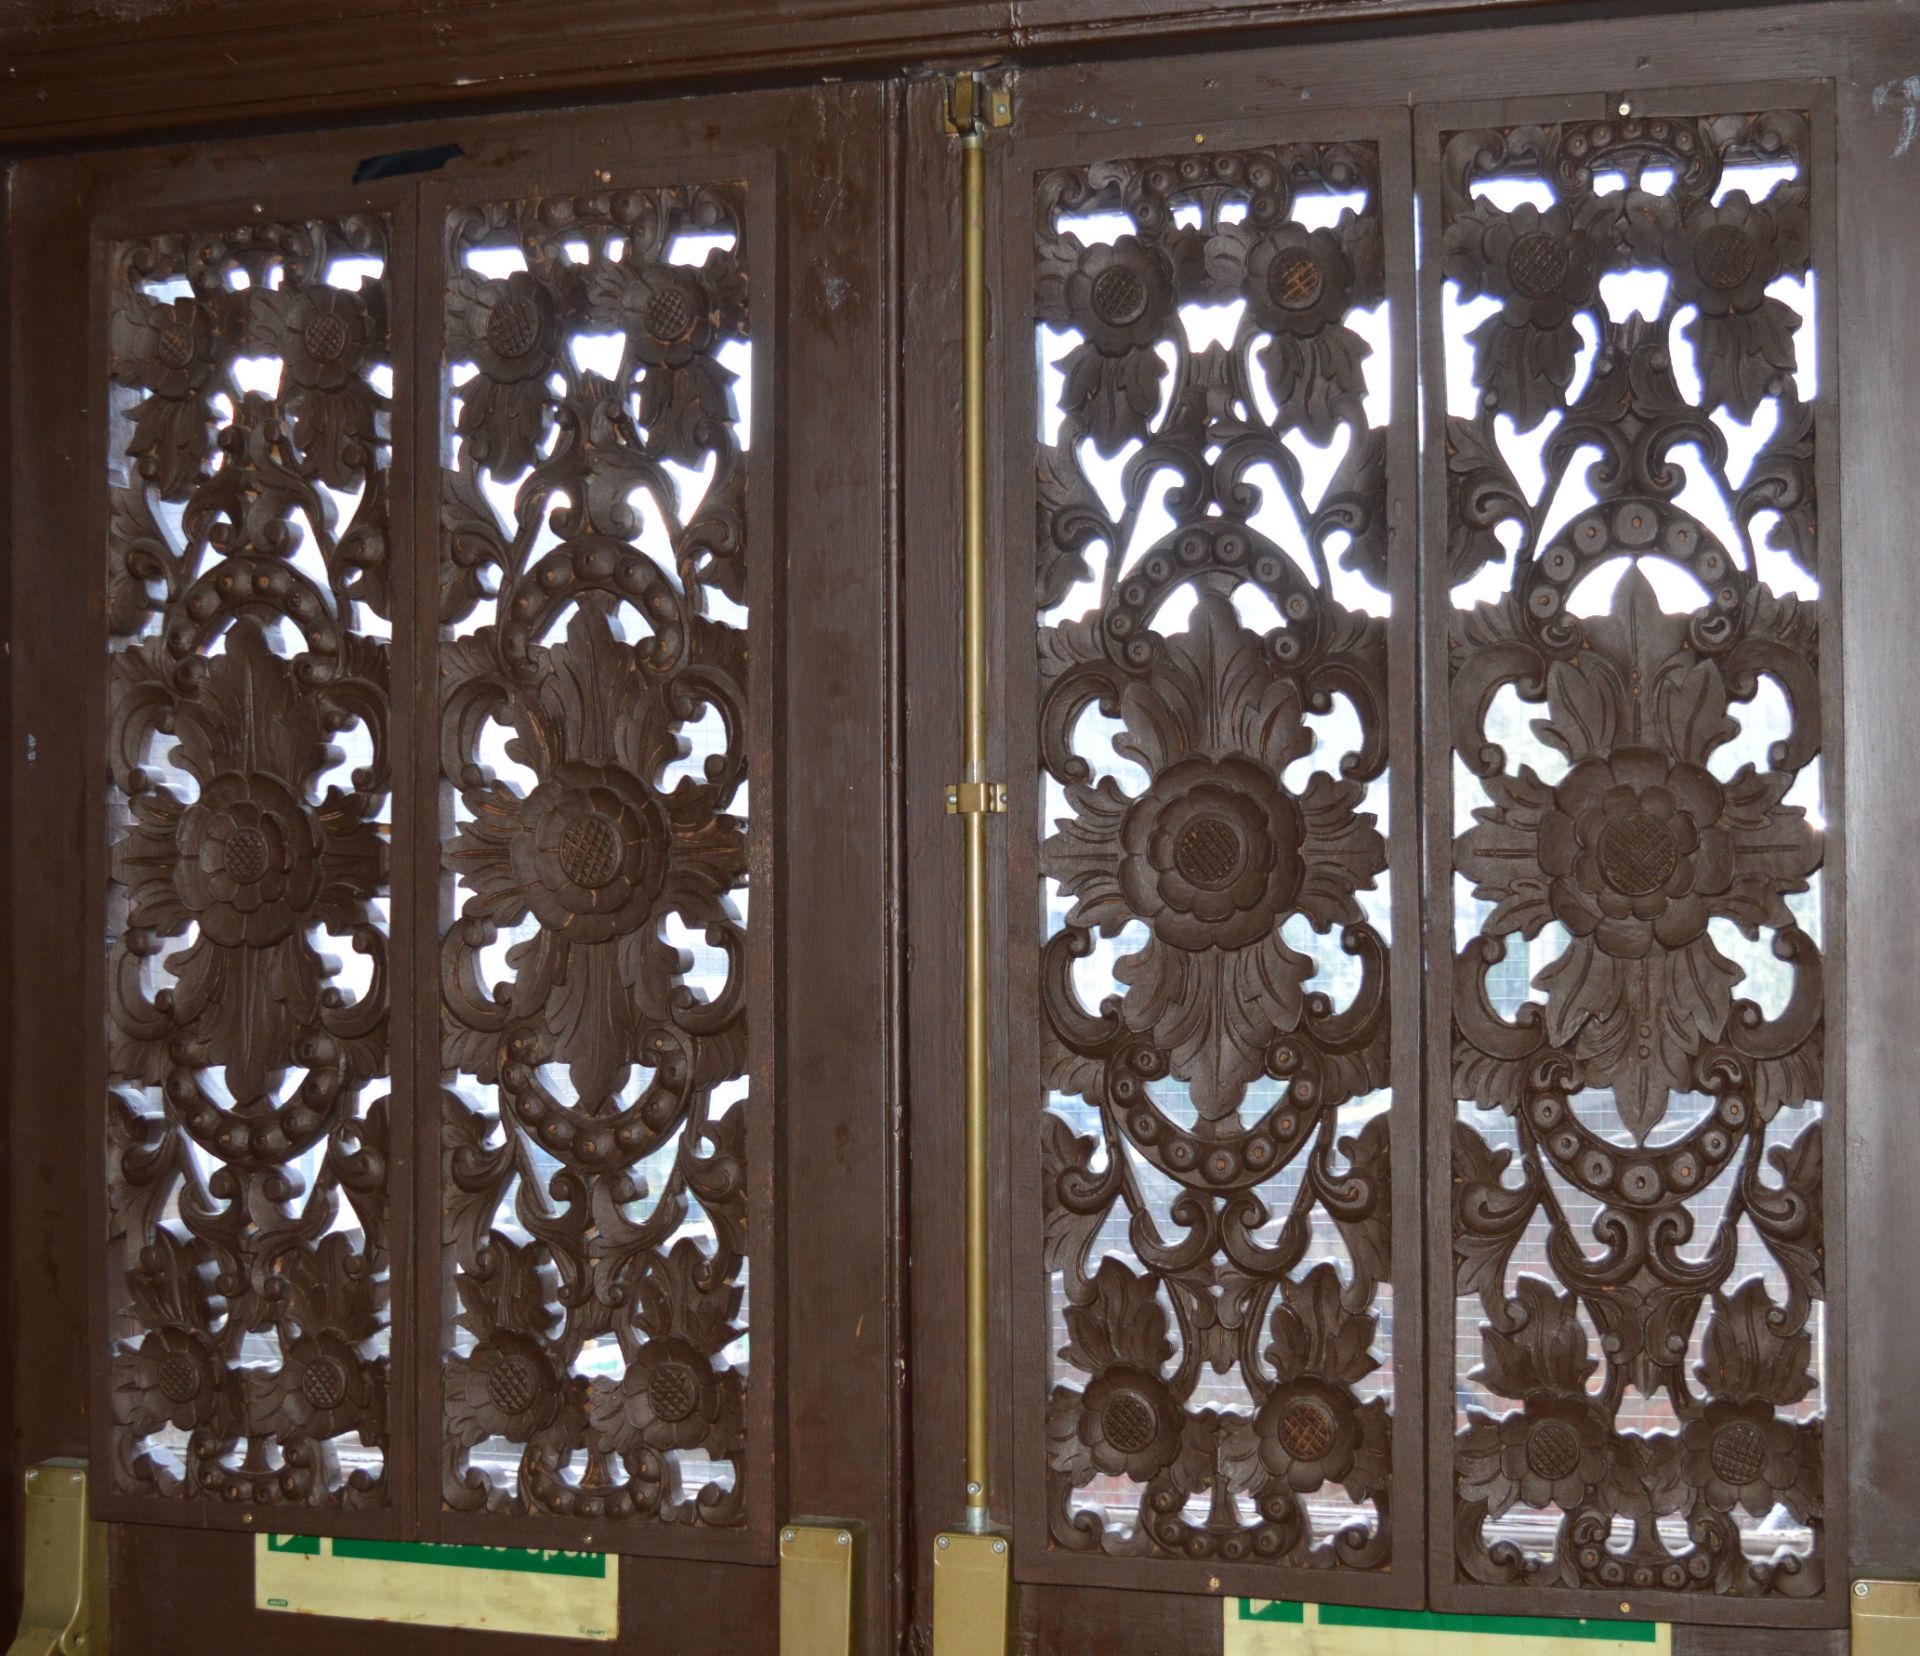 4 x Rectangular Handcrafted Thai Wood Carving Panels - Solid Wood - Ideal For Using as Window Panels - Image 2 of 6